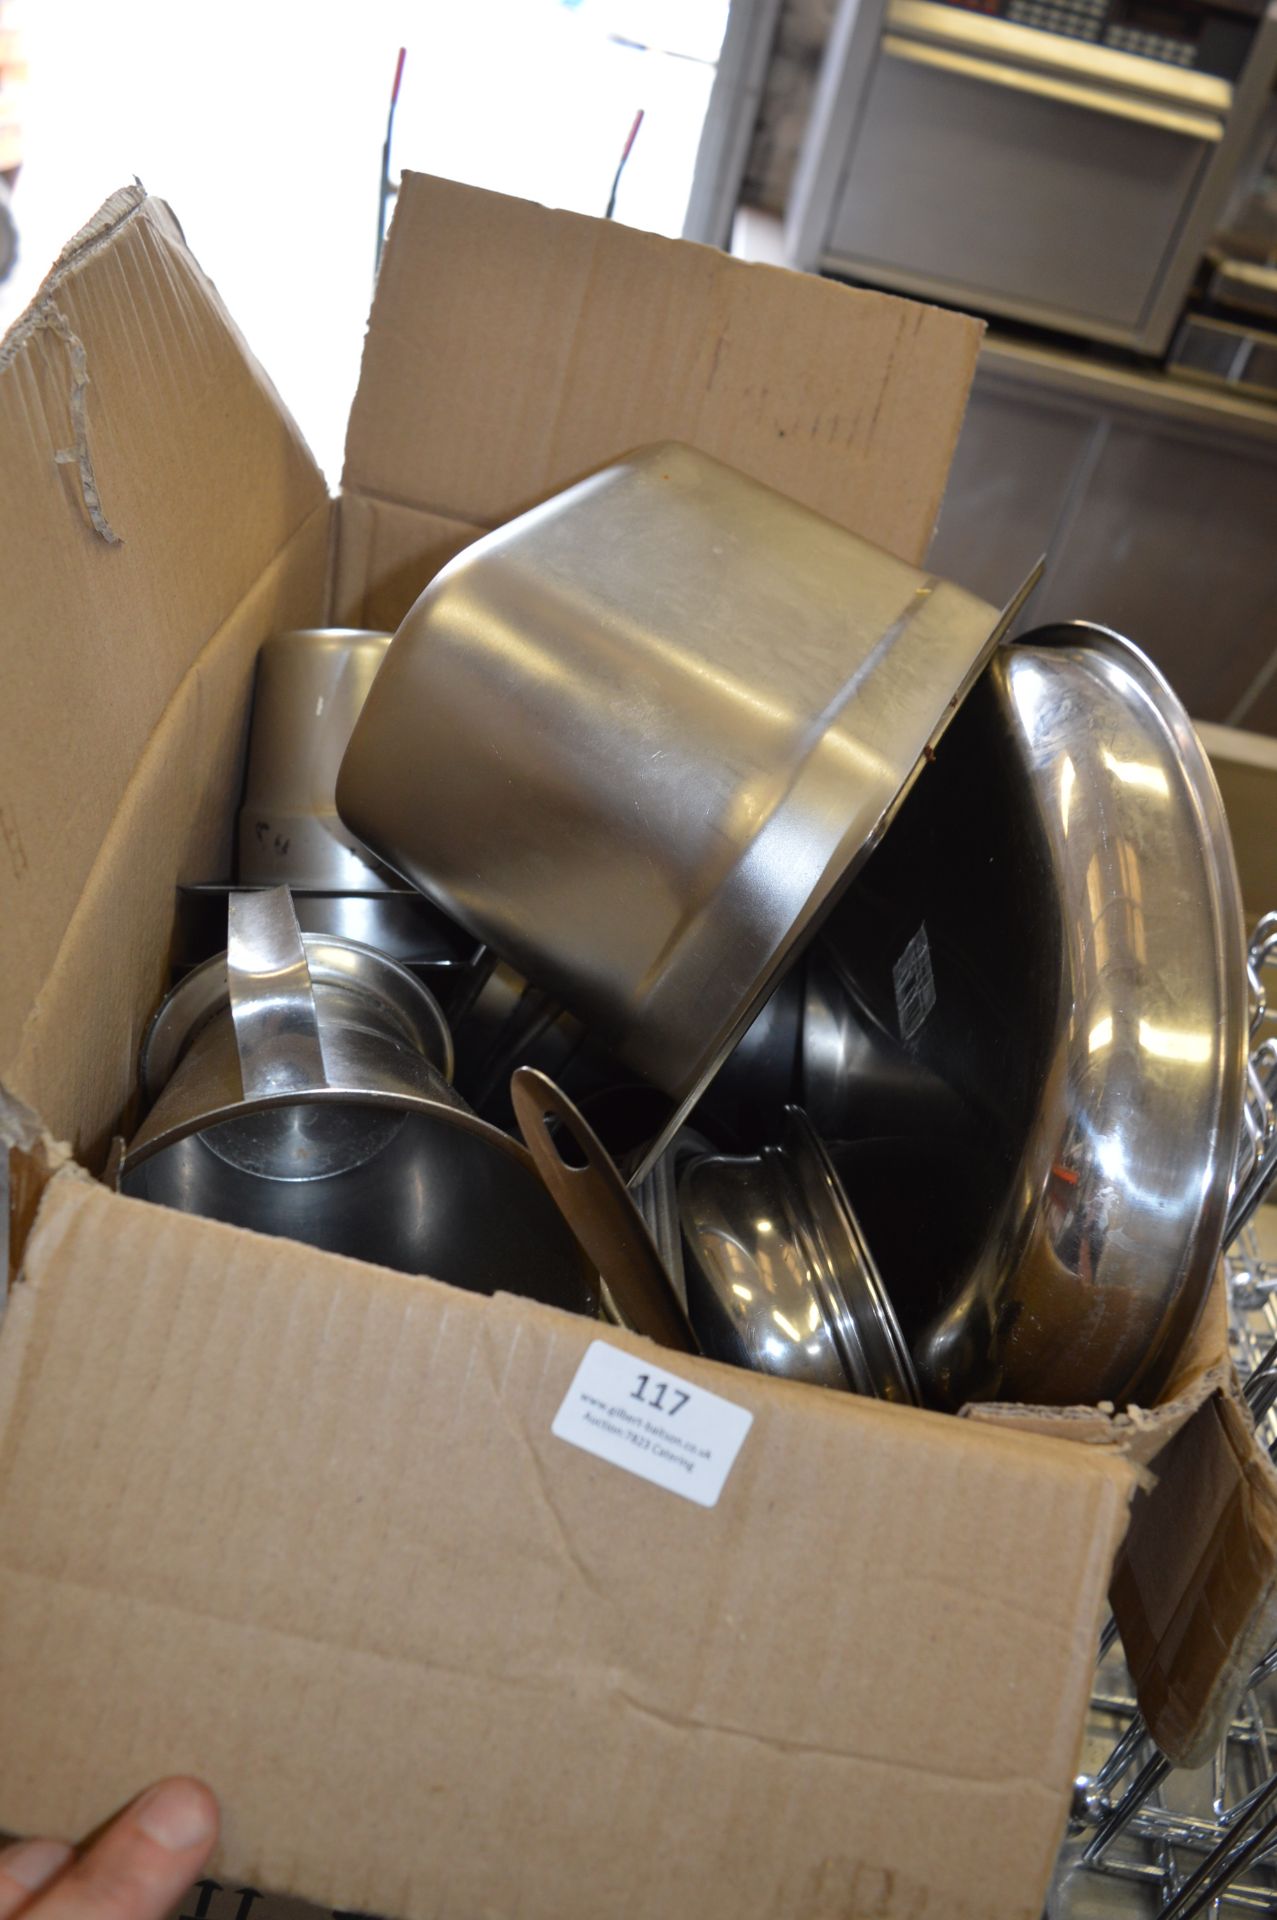 Box Containing Assorted Stainless Steel Dishes, Bain Marie Inserts, Jugs, etc.